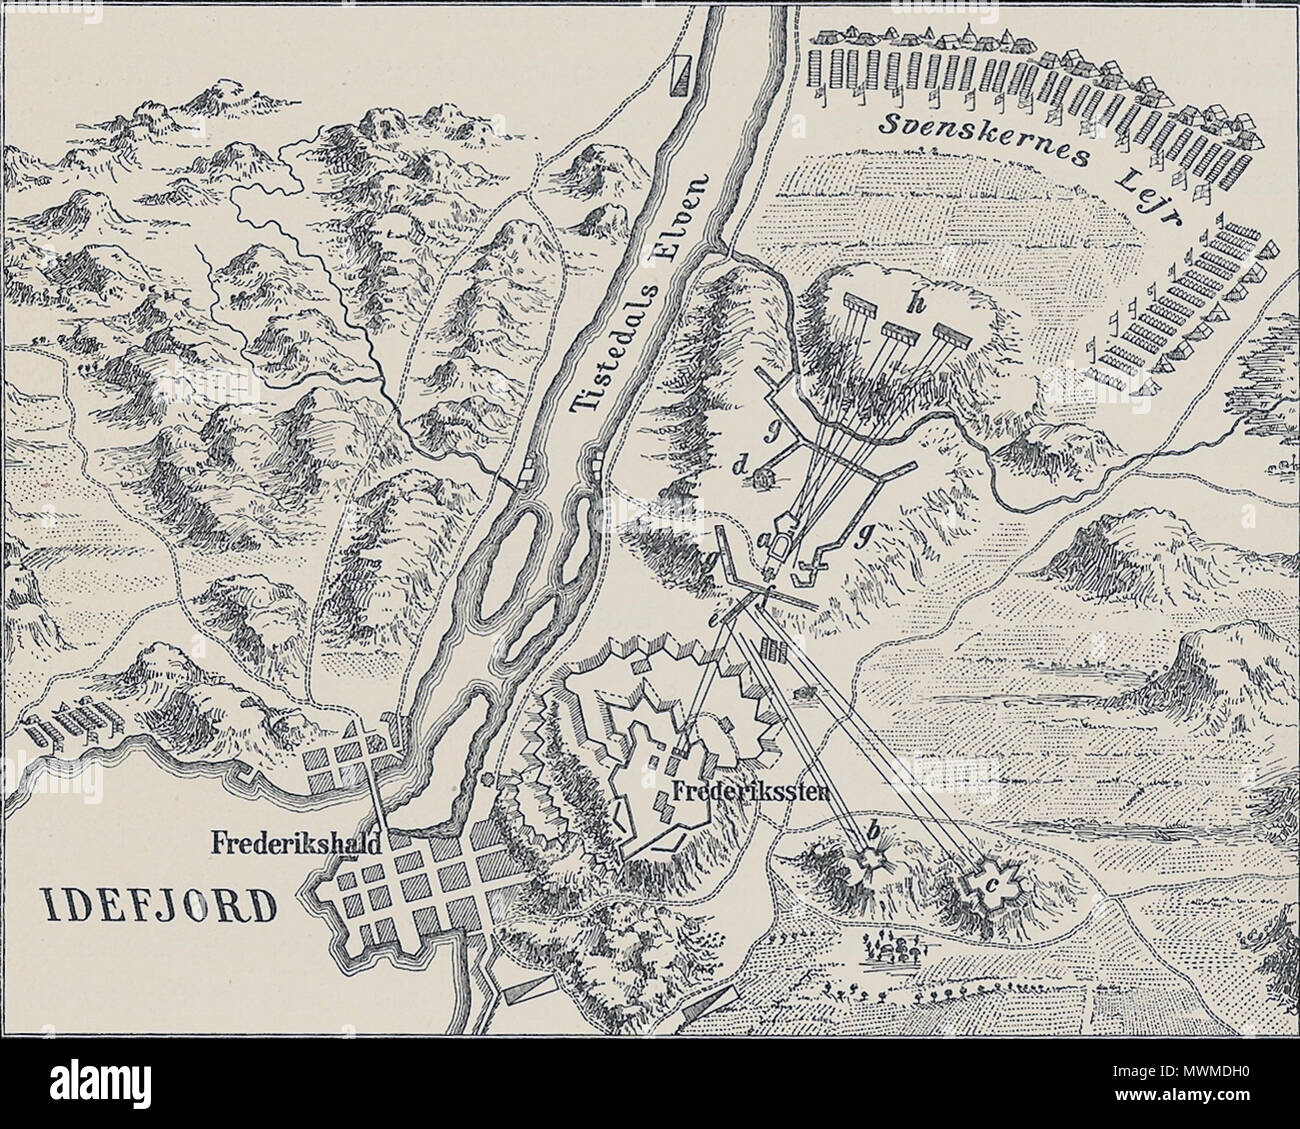 . English: Plan of the Siege of Frederiksten 1718. Key to the letters: a) The Fort Gyldenløve b) The Great Tower c) Overbjerget d) The hut of Karl XII e) The place where Karl XII was shot f & g) Swedish trenches h) Swedish artillery positions . 1907. Saddhiyama 488 Plan of the Siege of Frederiksten 1718 Stock Photo